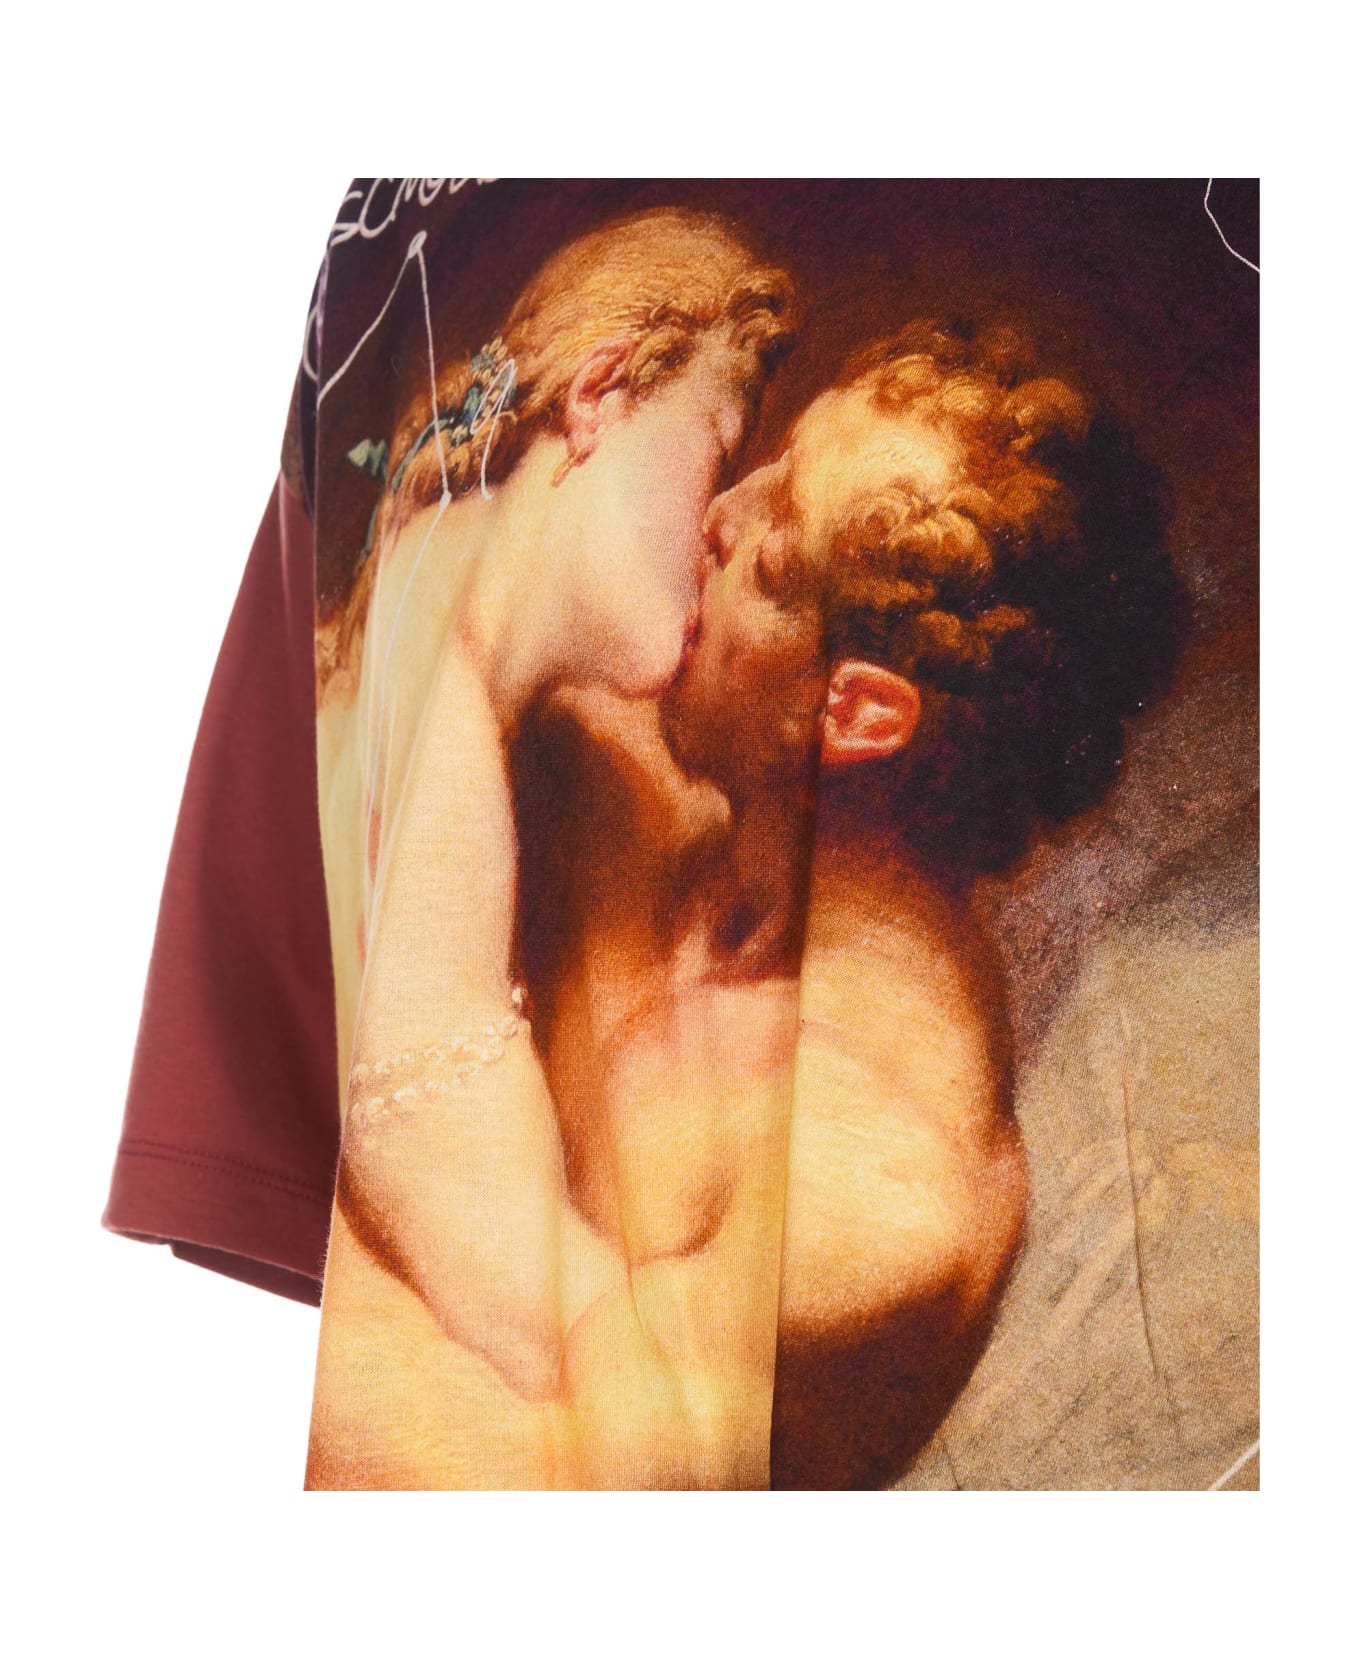 Vivienne Westwood Kiss Oversized T-shirt - Brown シャツ